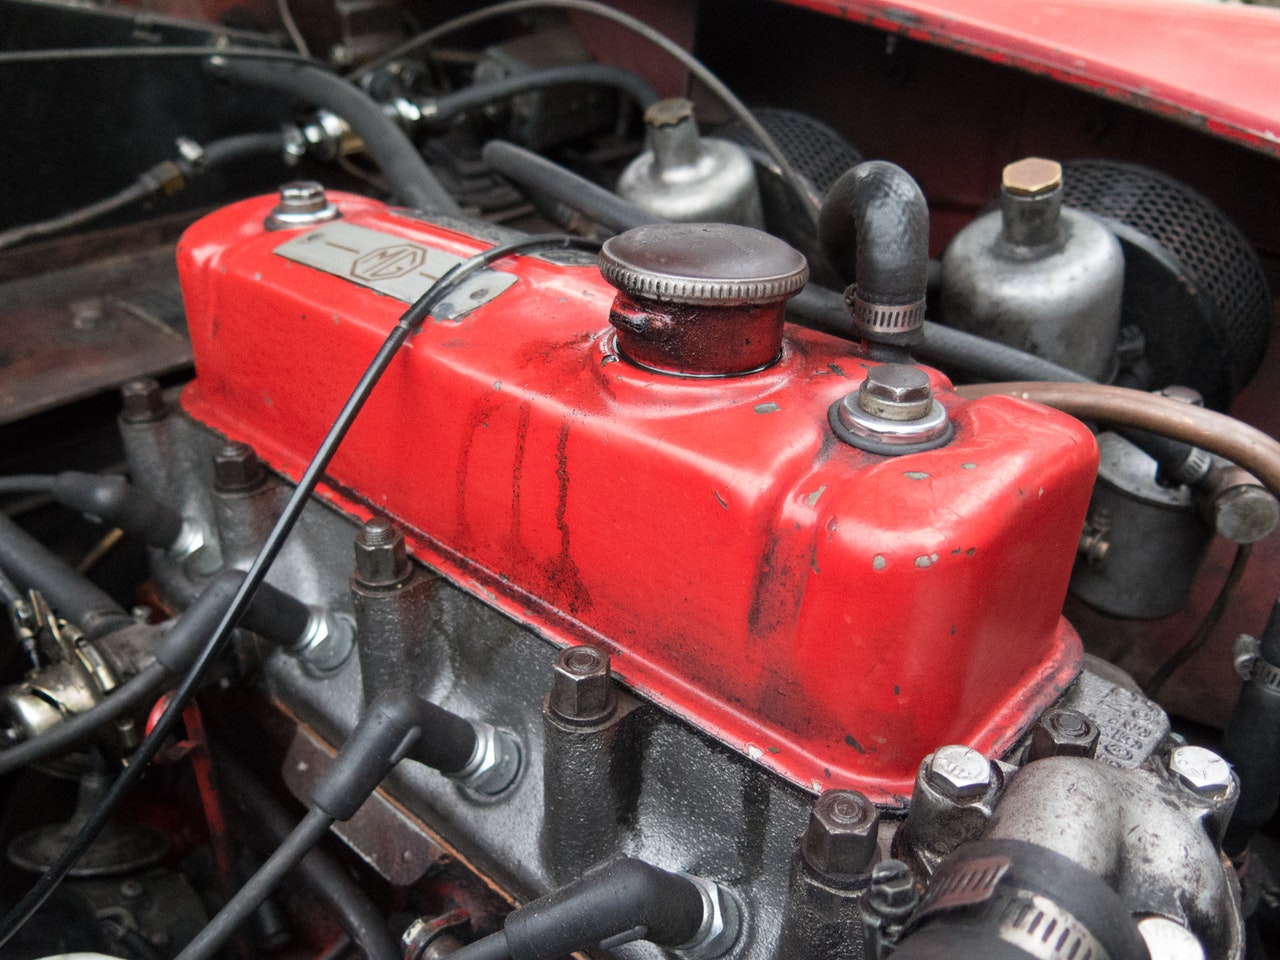 Cleaning the Car Engine in 8 Easy Steps DIY